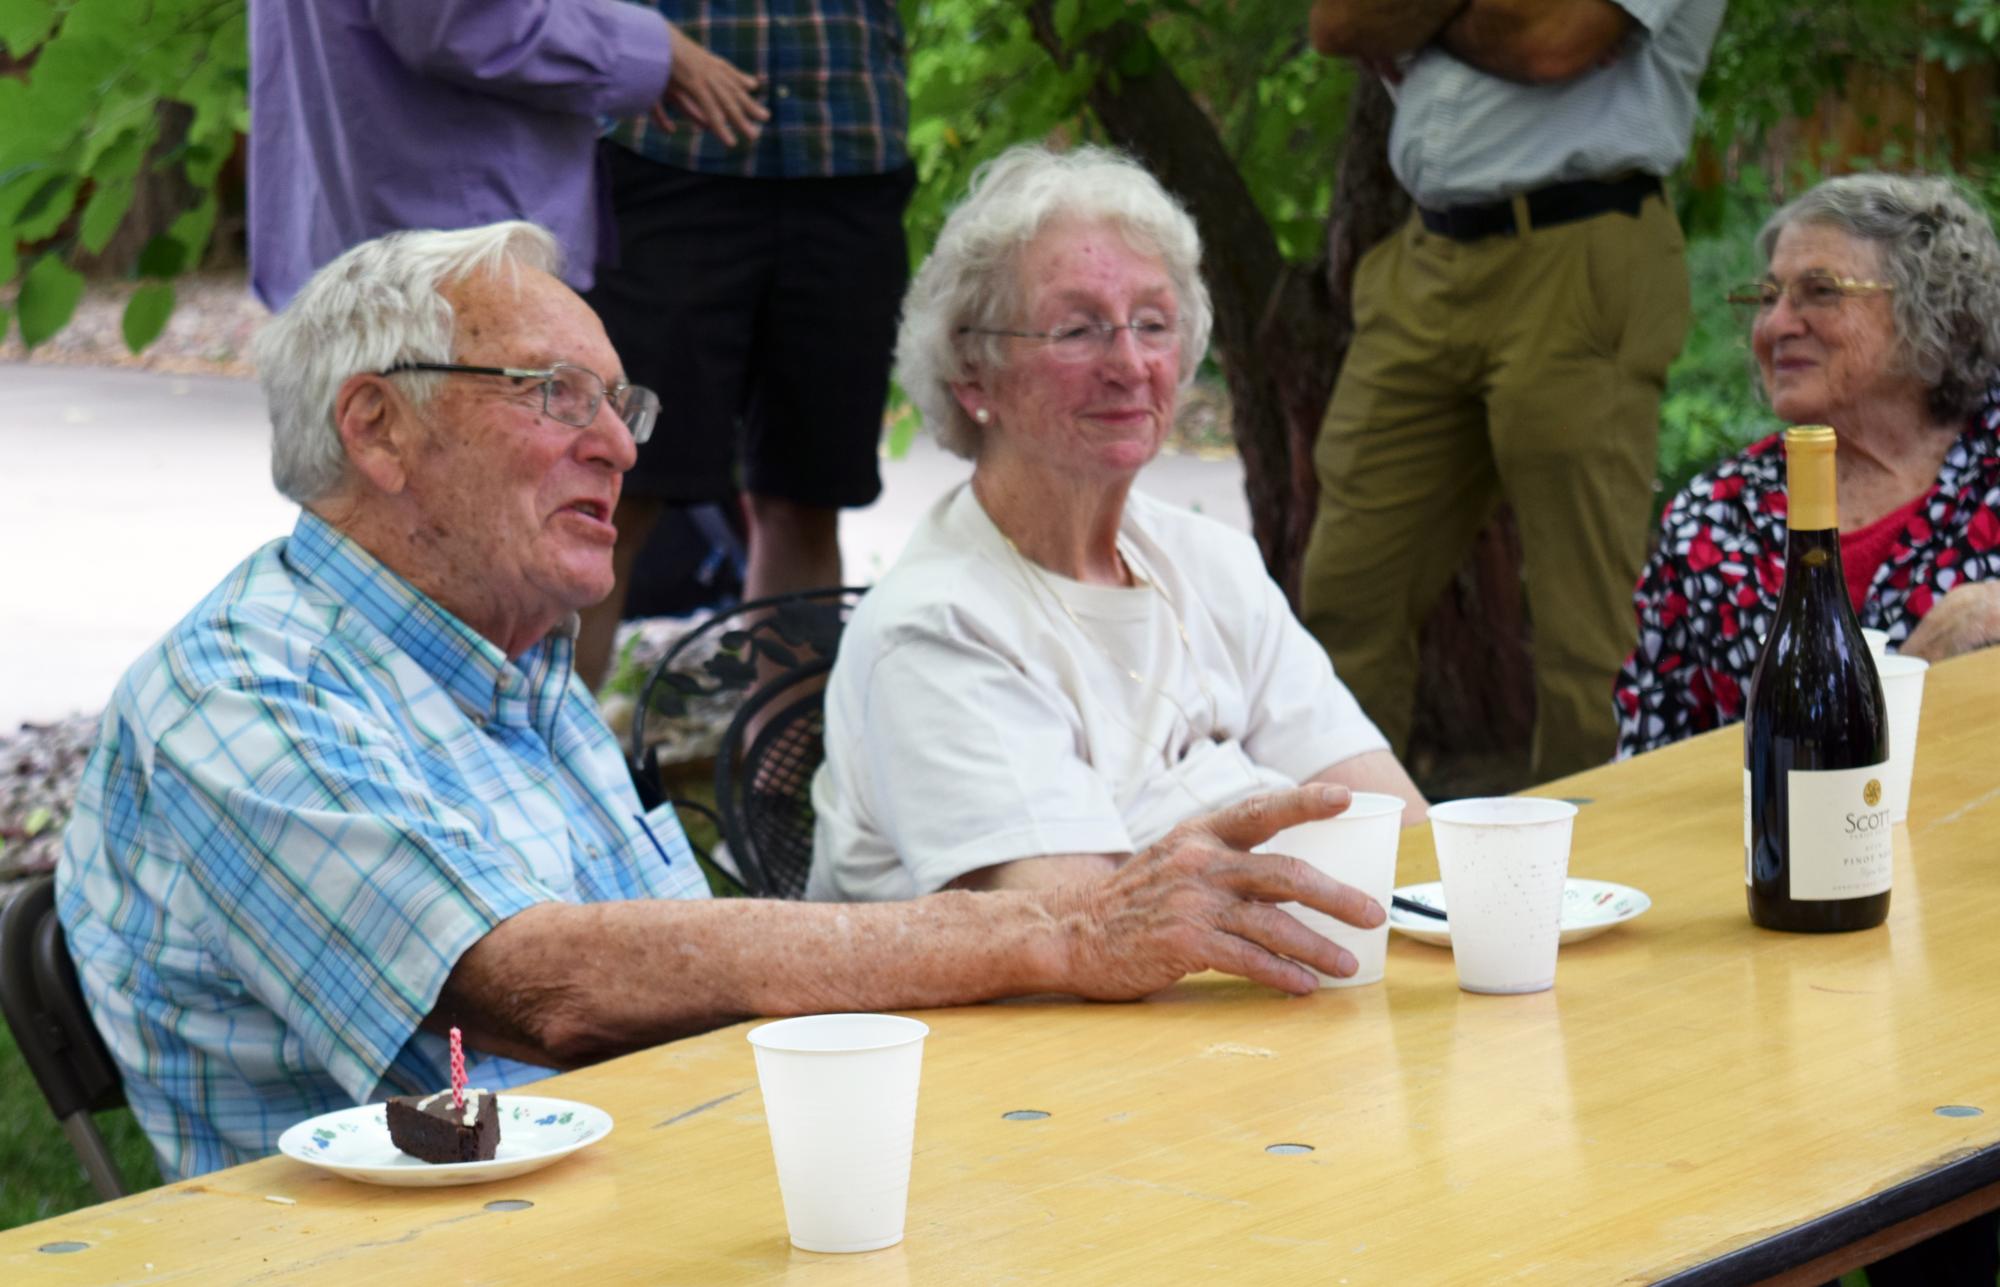 Barnes chats with guests at a backyard BBQ in celebration of his 90th birthday. 